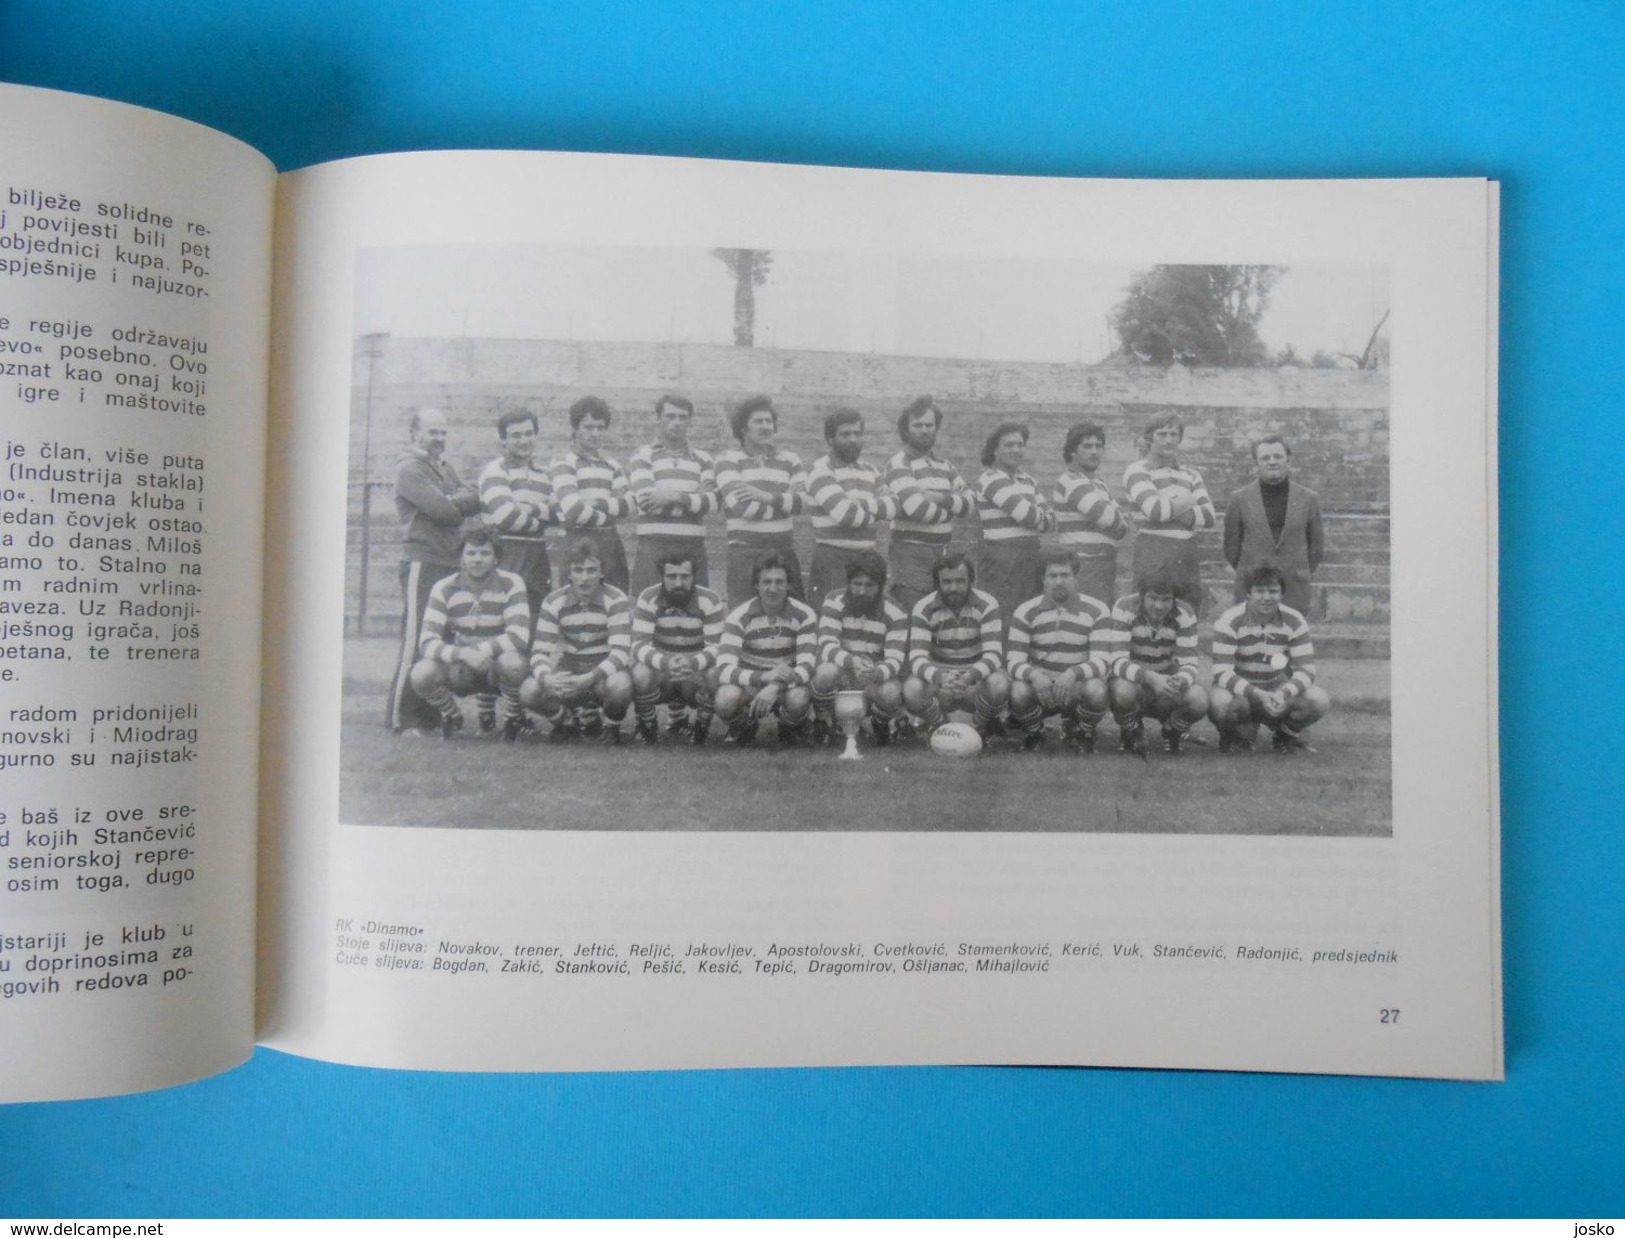 YUGOSLAV RUGBY FEDERATION 1954-1984 ... official book ( monograph ) * Yougoslavie Rugby Association monographie